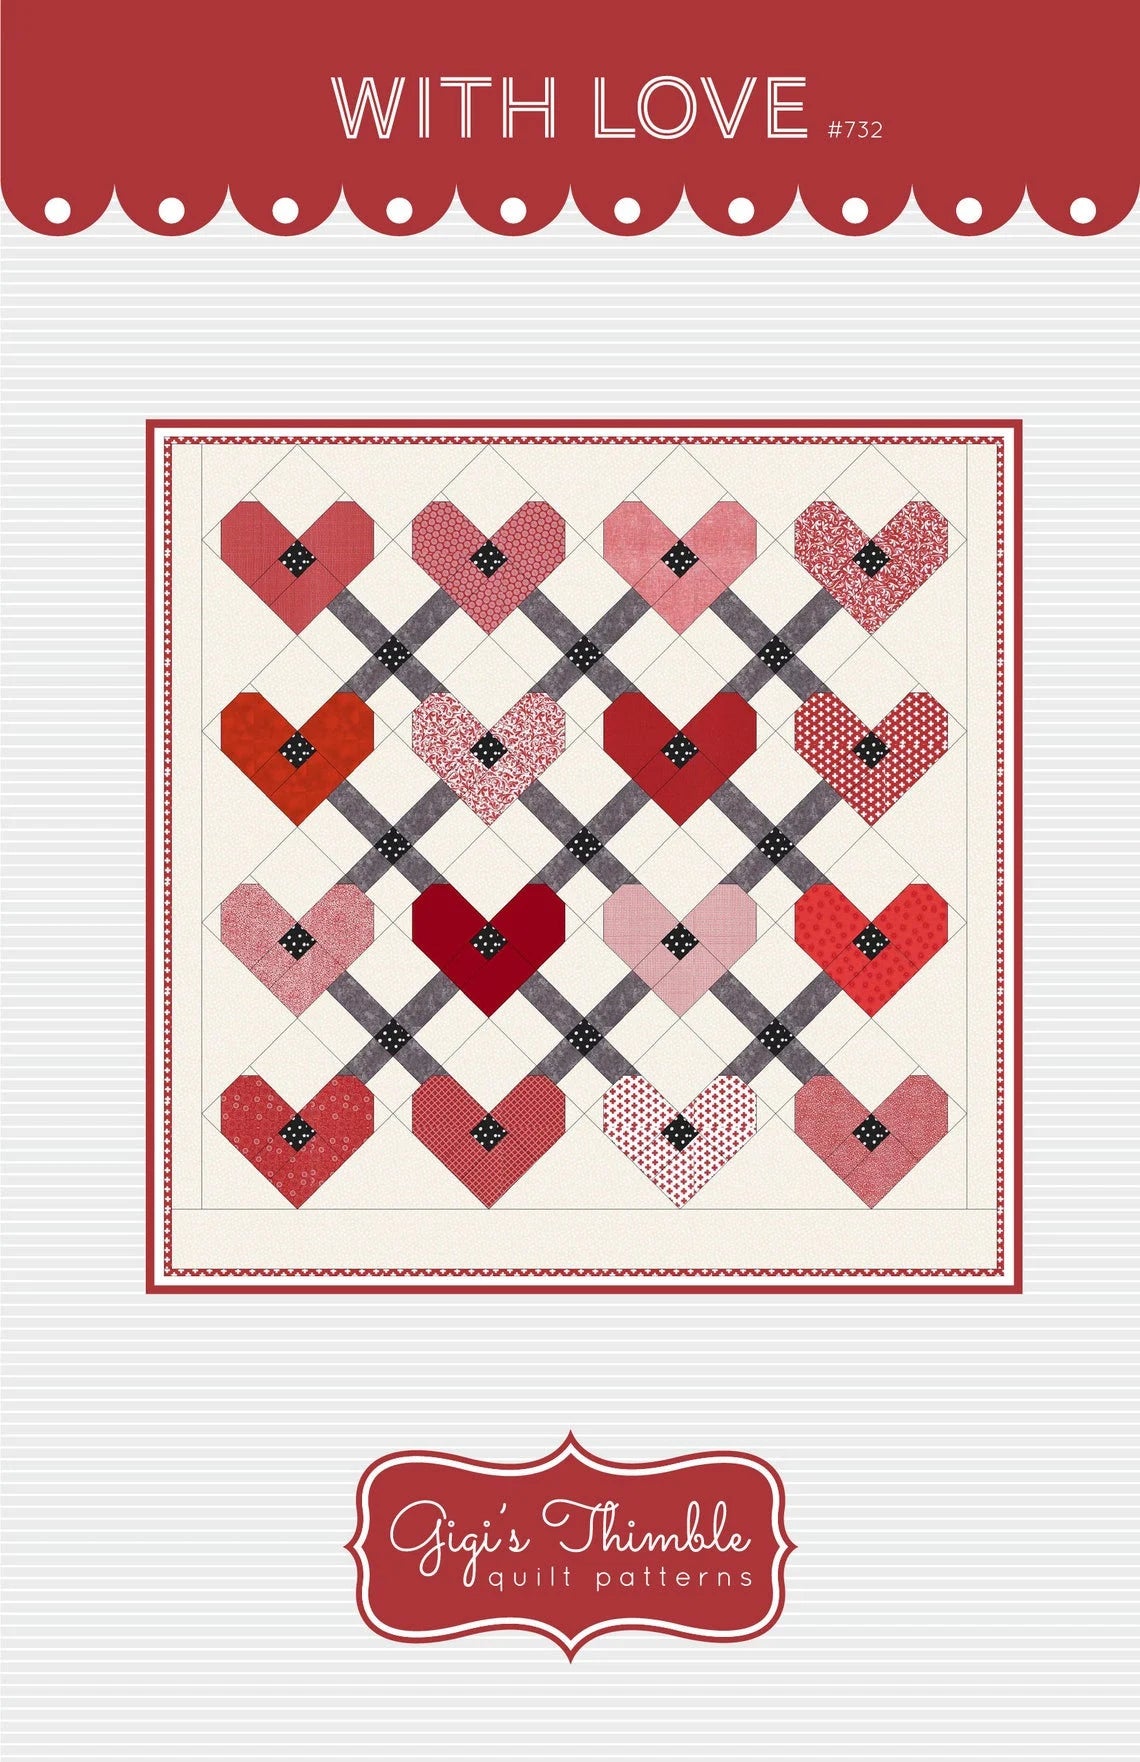 With Love Quilt Pattern by Amber Johnson of Gigi’s Thimble Quilt Patterns